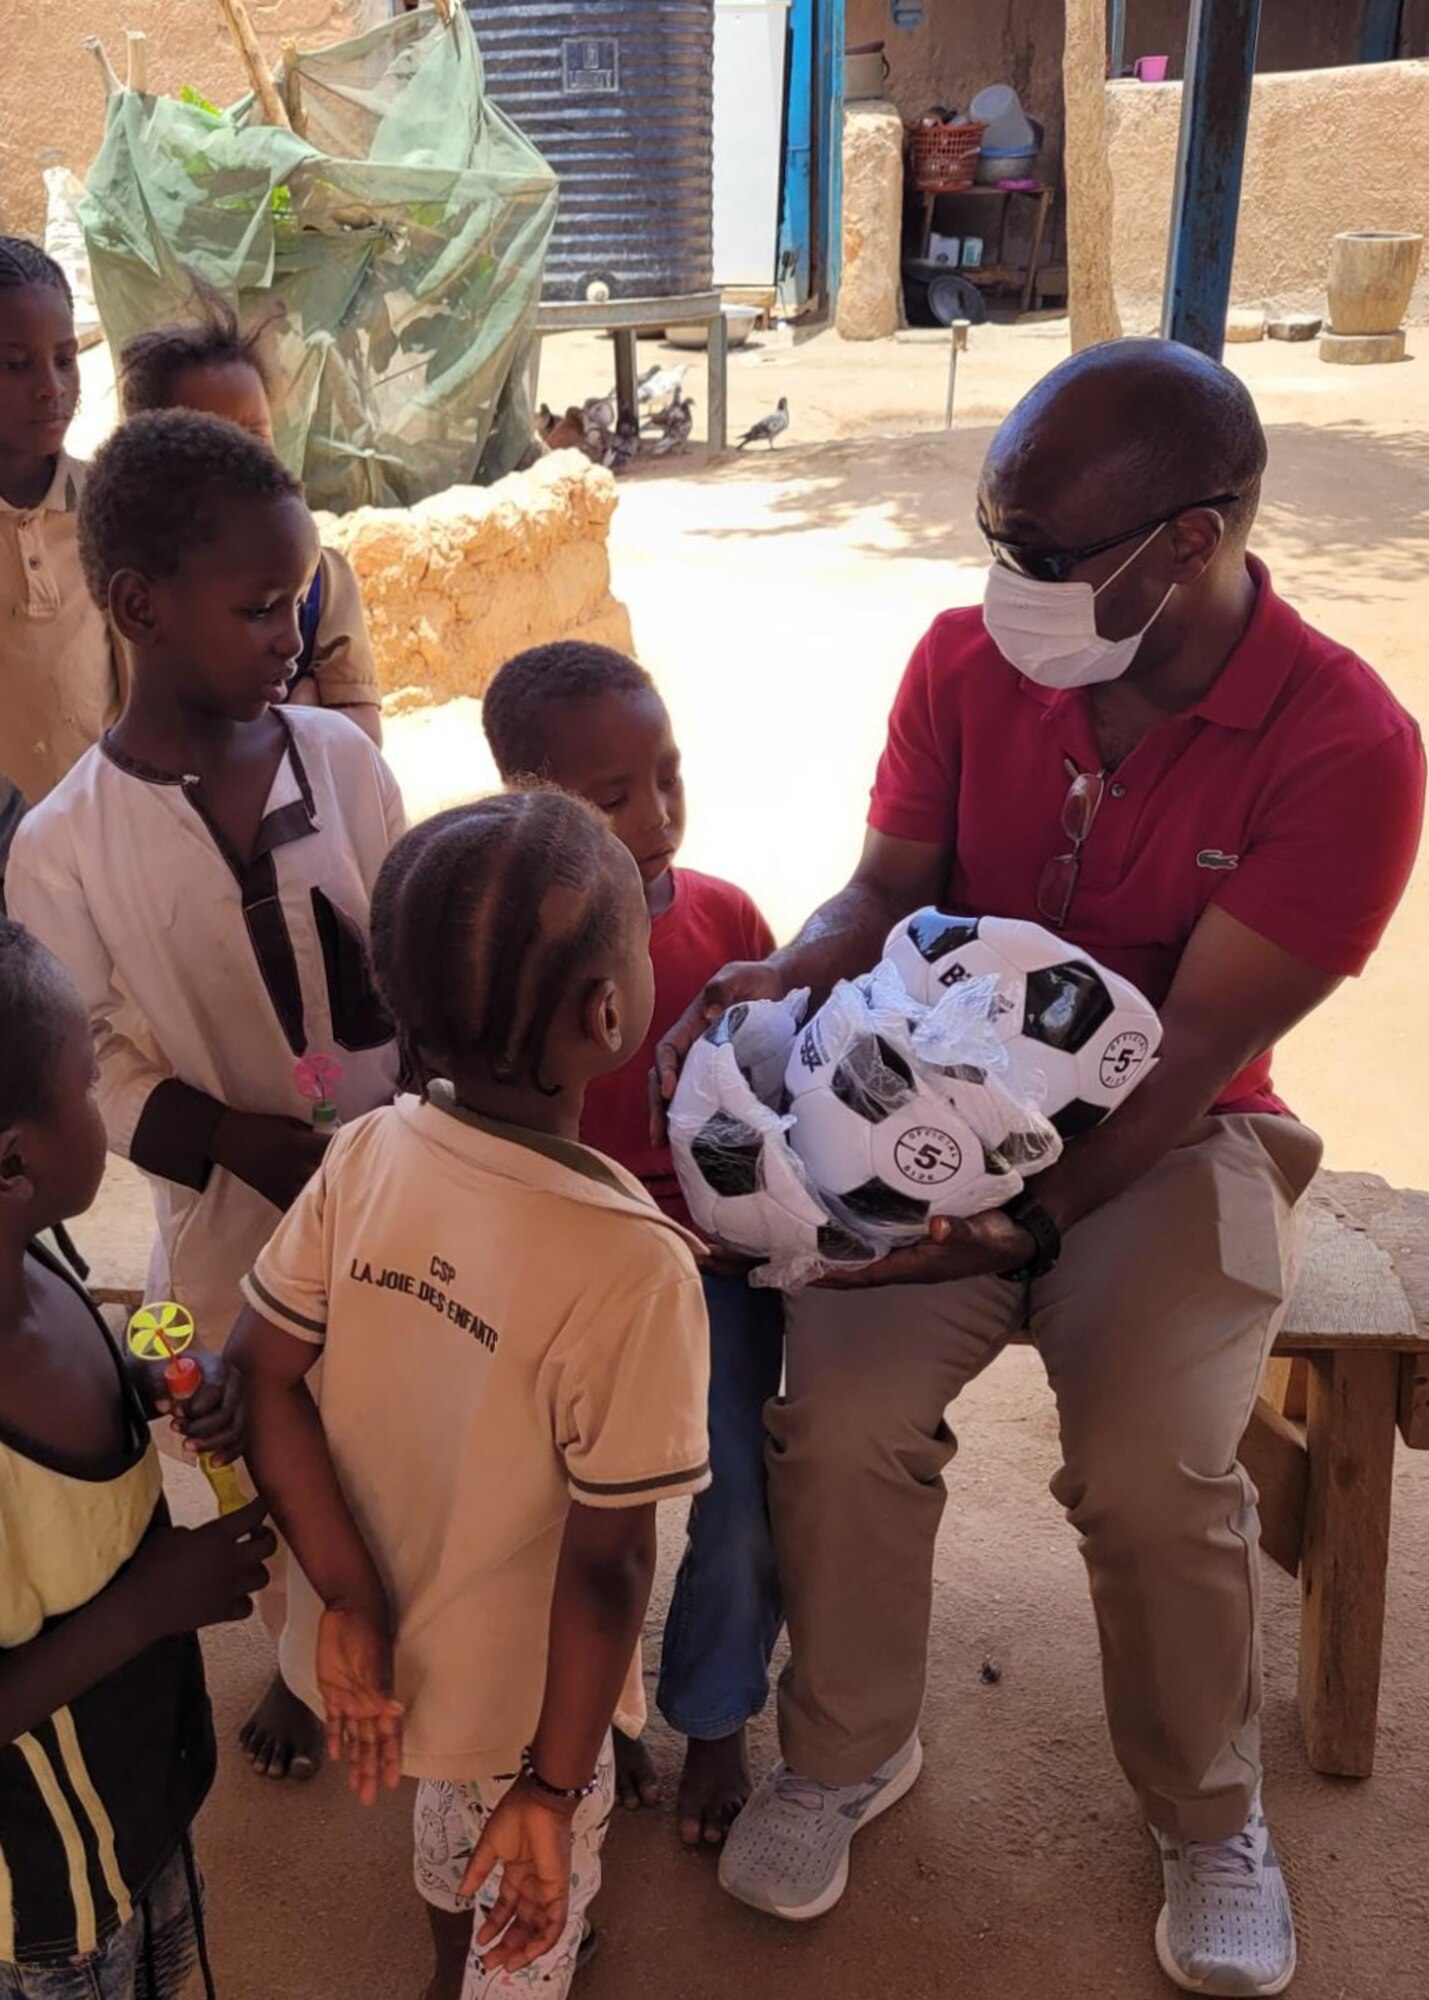 U.S. Air Force Capt. Guy Kagere, 435th Air Expeditionary Wing chaplain, donates supplies to children at an orphanage in Agadez City, Agadez, May 5, 2021.